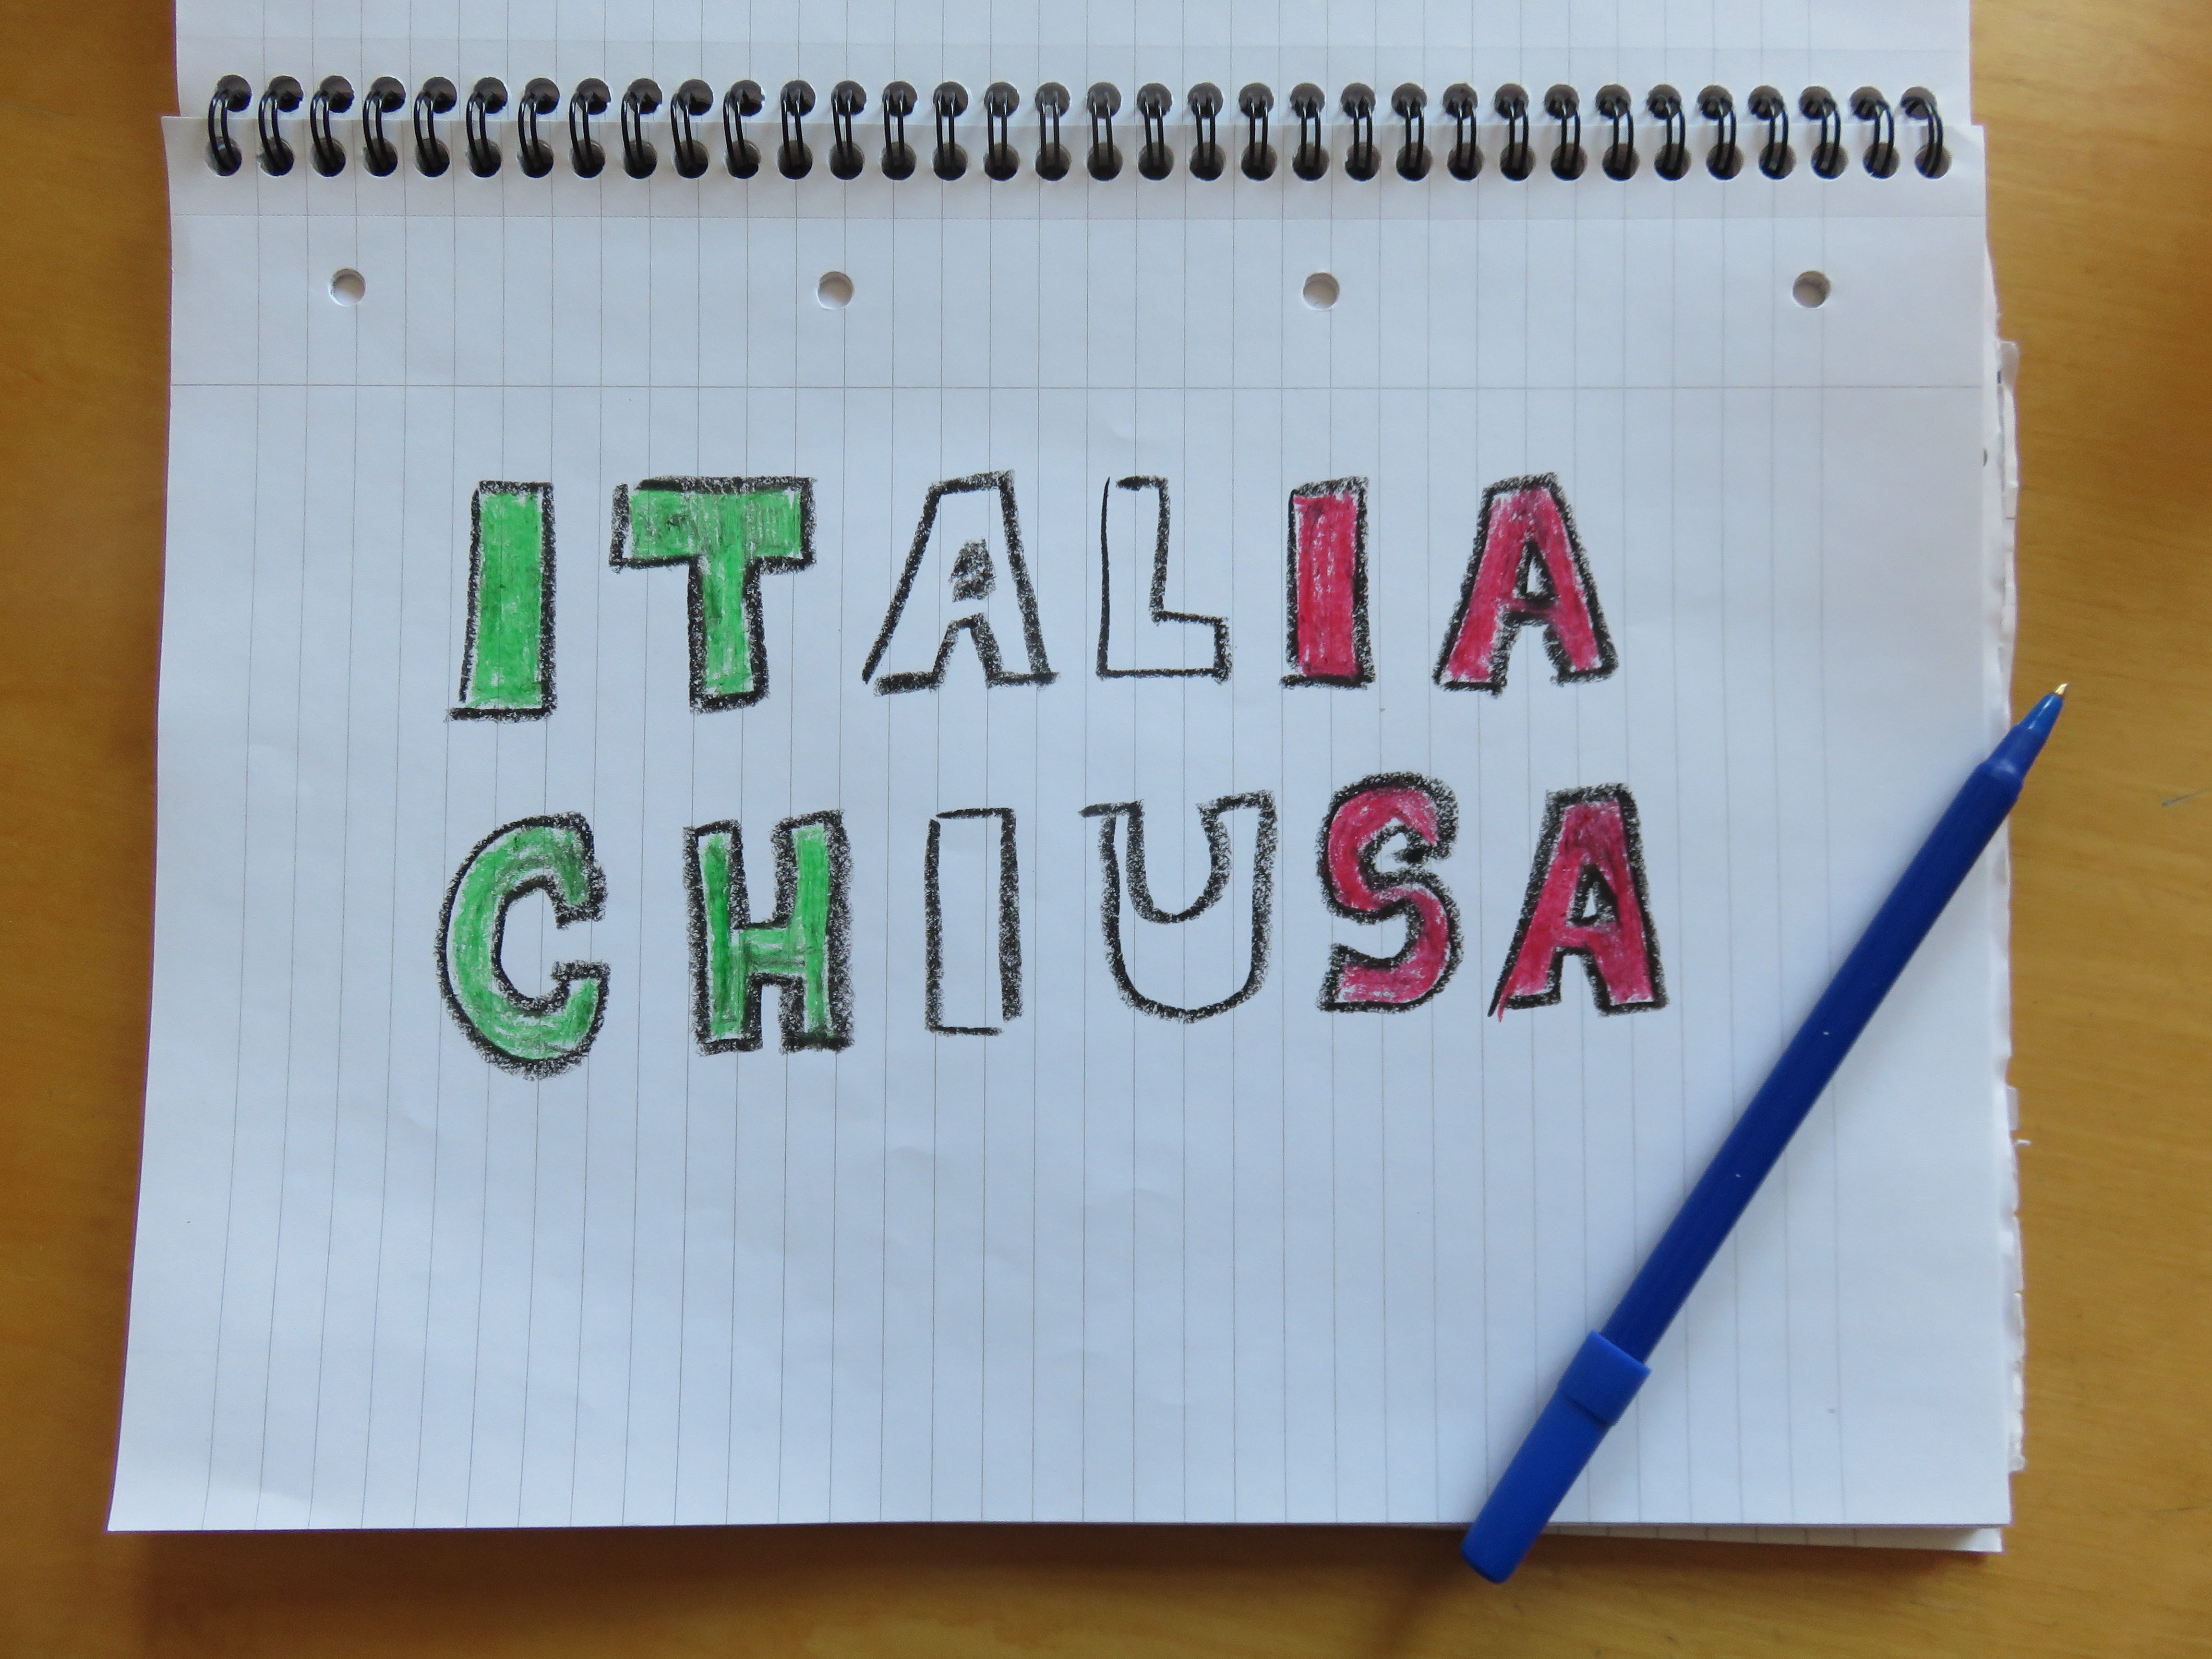 Italia Chiusa - drawn in an exercise book, and coloured in green red and white with crayon